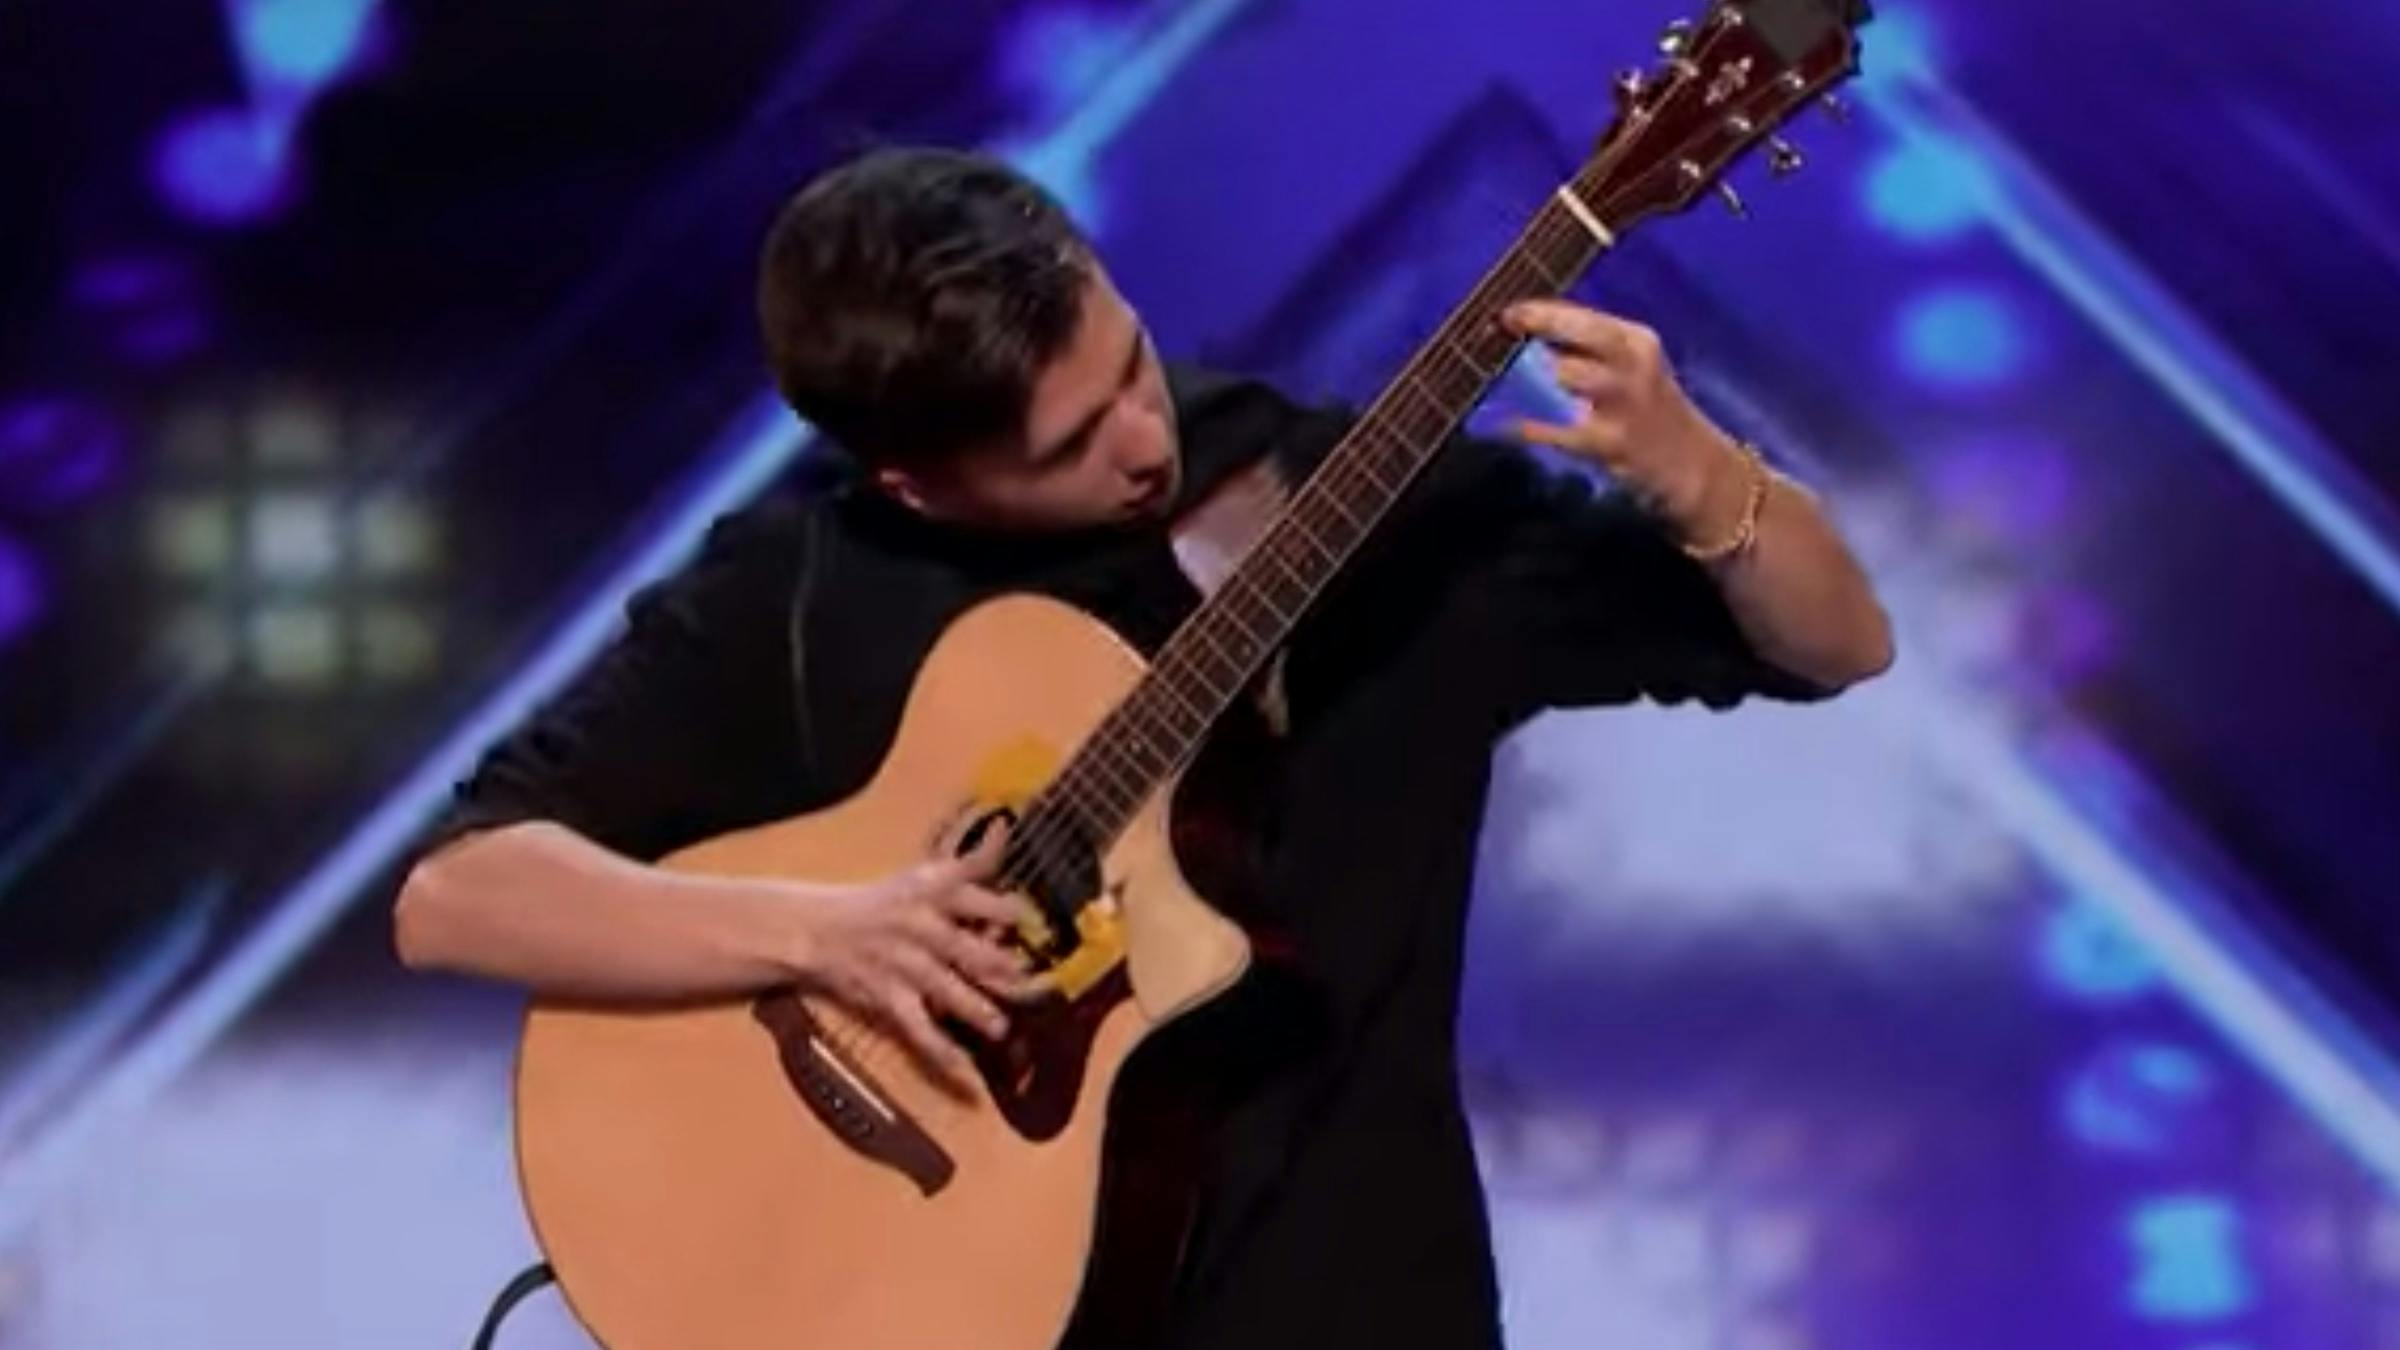 Watch This Guitarist's Beethoven/System Of A Down Mash-Up Slay America's Got Talent